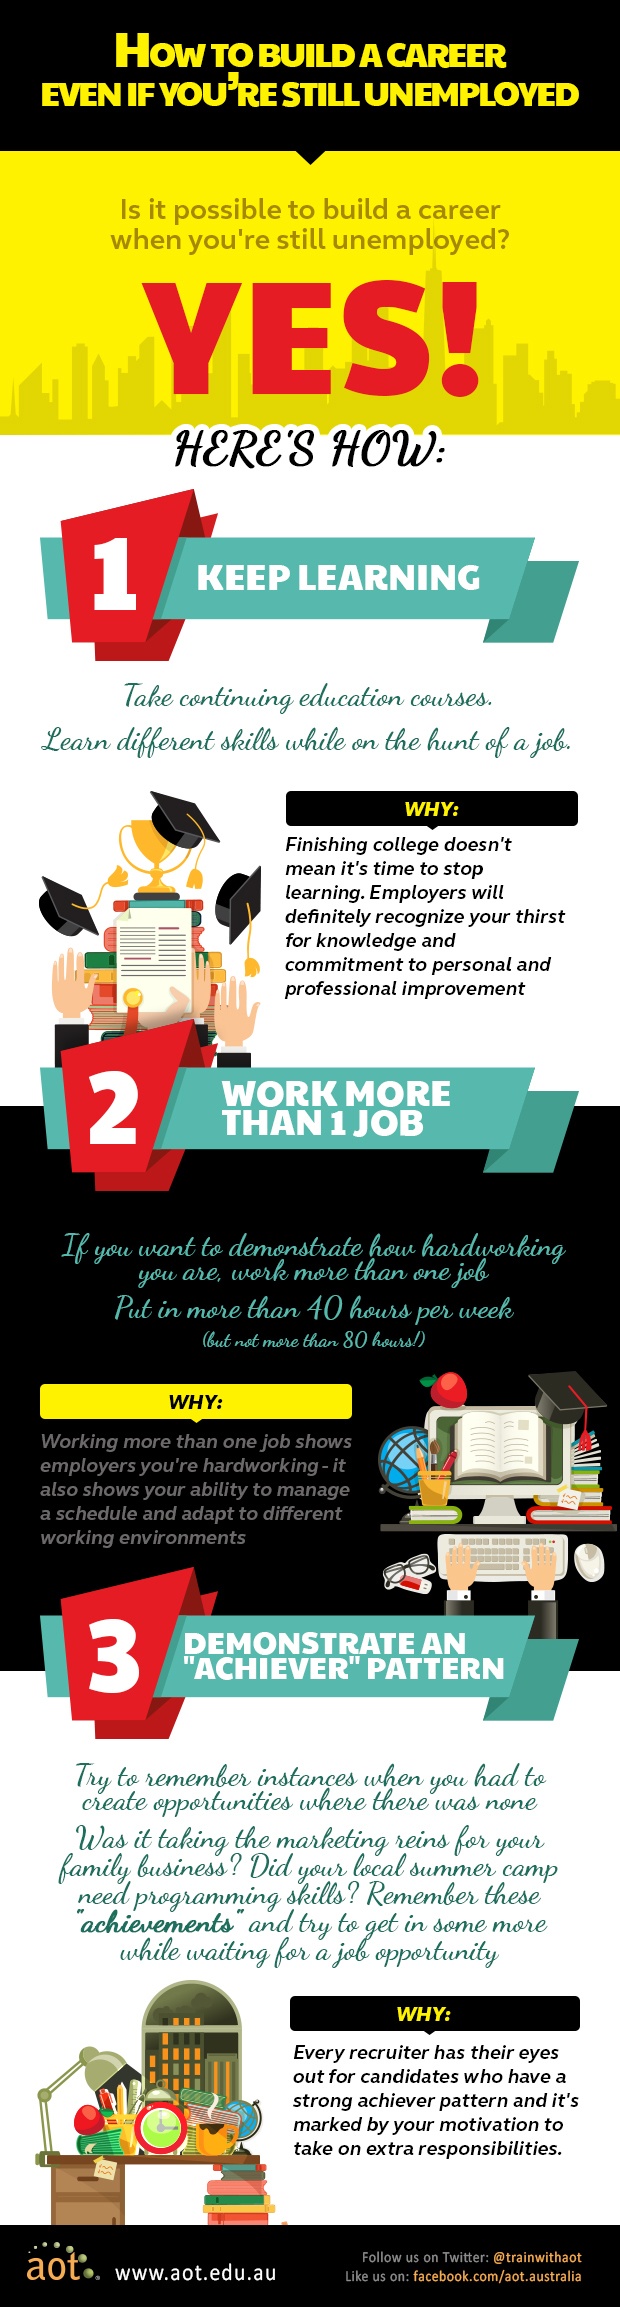 How To Build A Career Even If You Are Still Unemployed Infographic